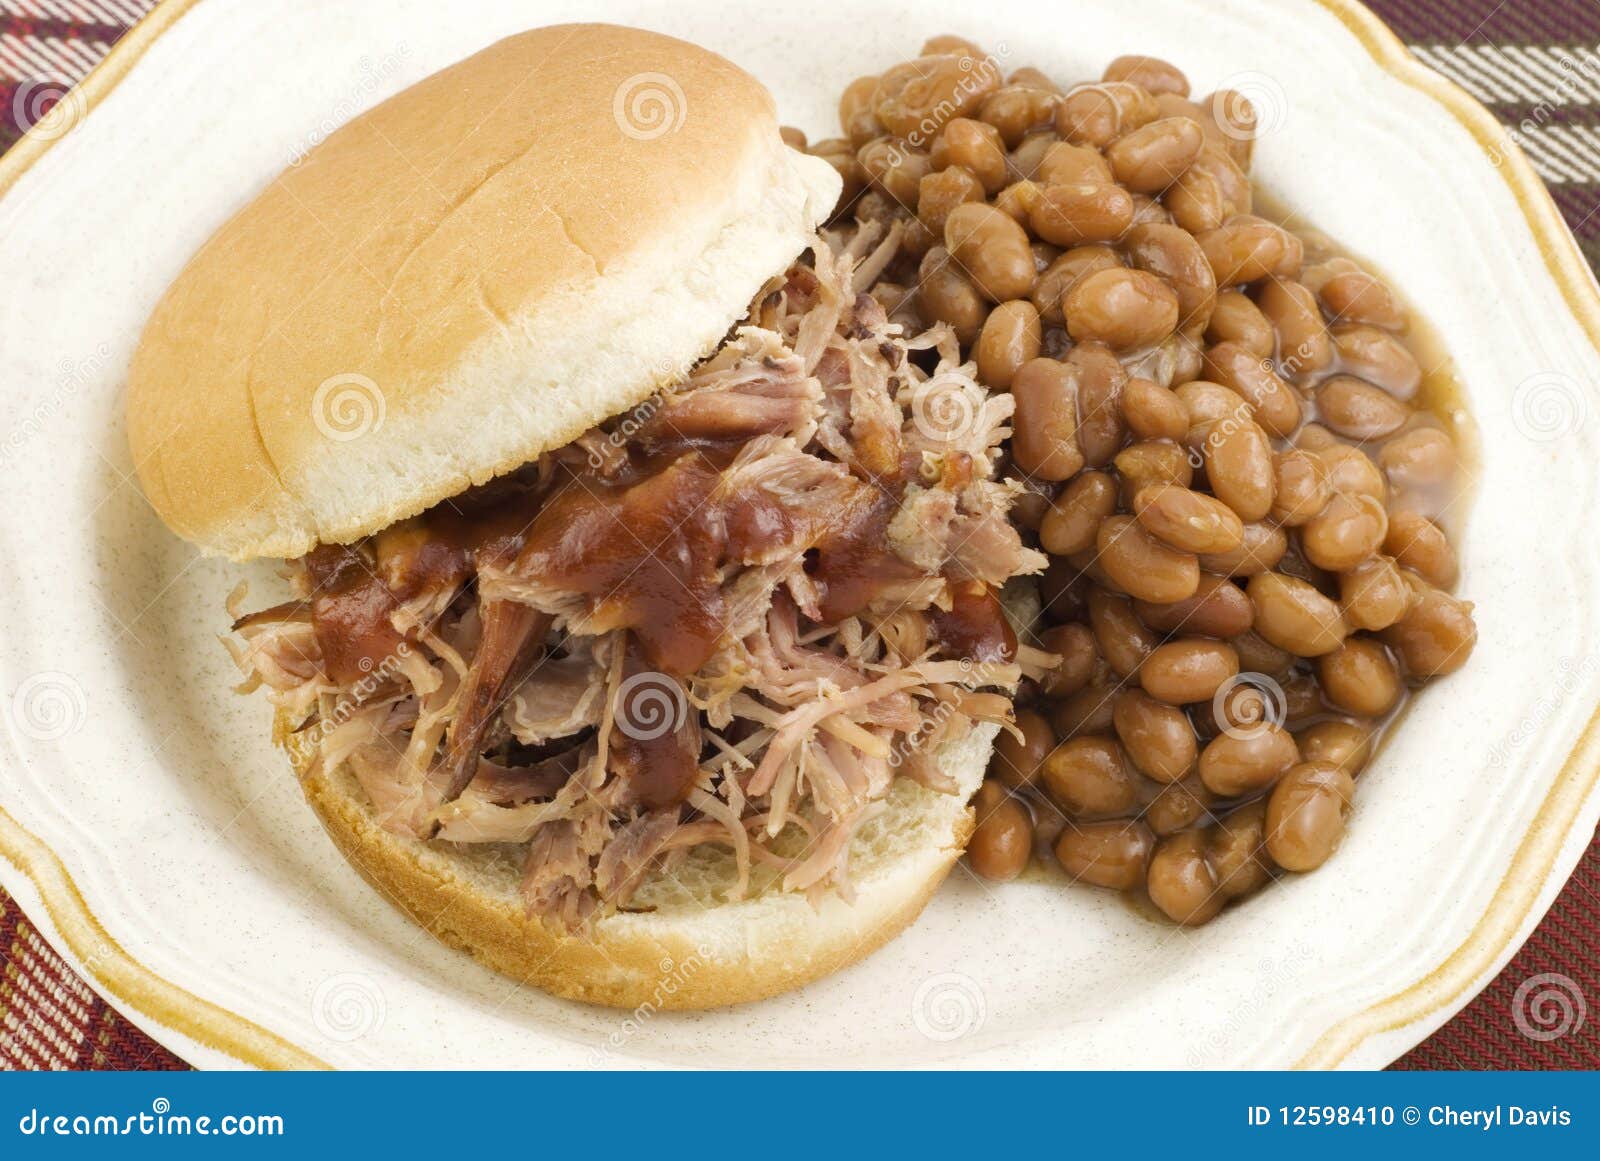 Barbecue with Baked Beans Stock Image of plate, beans: